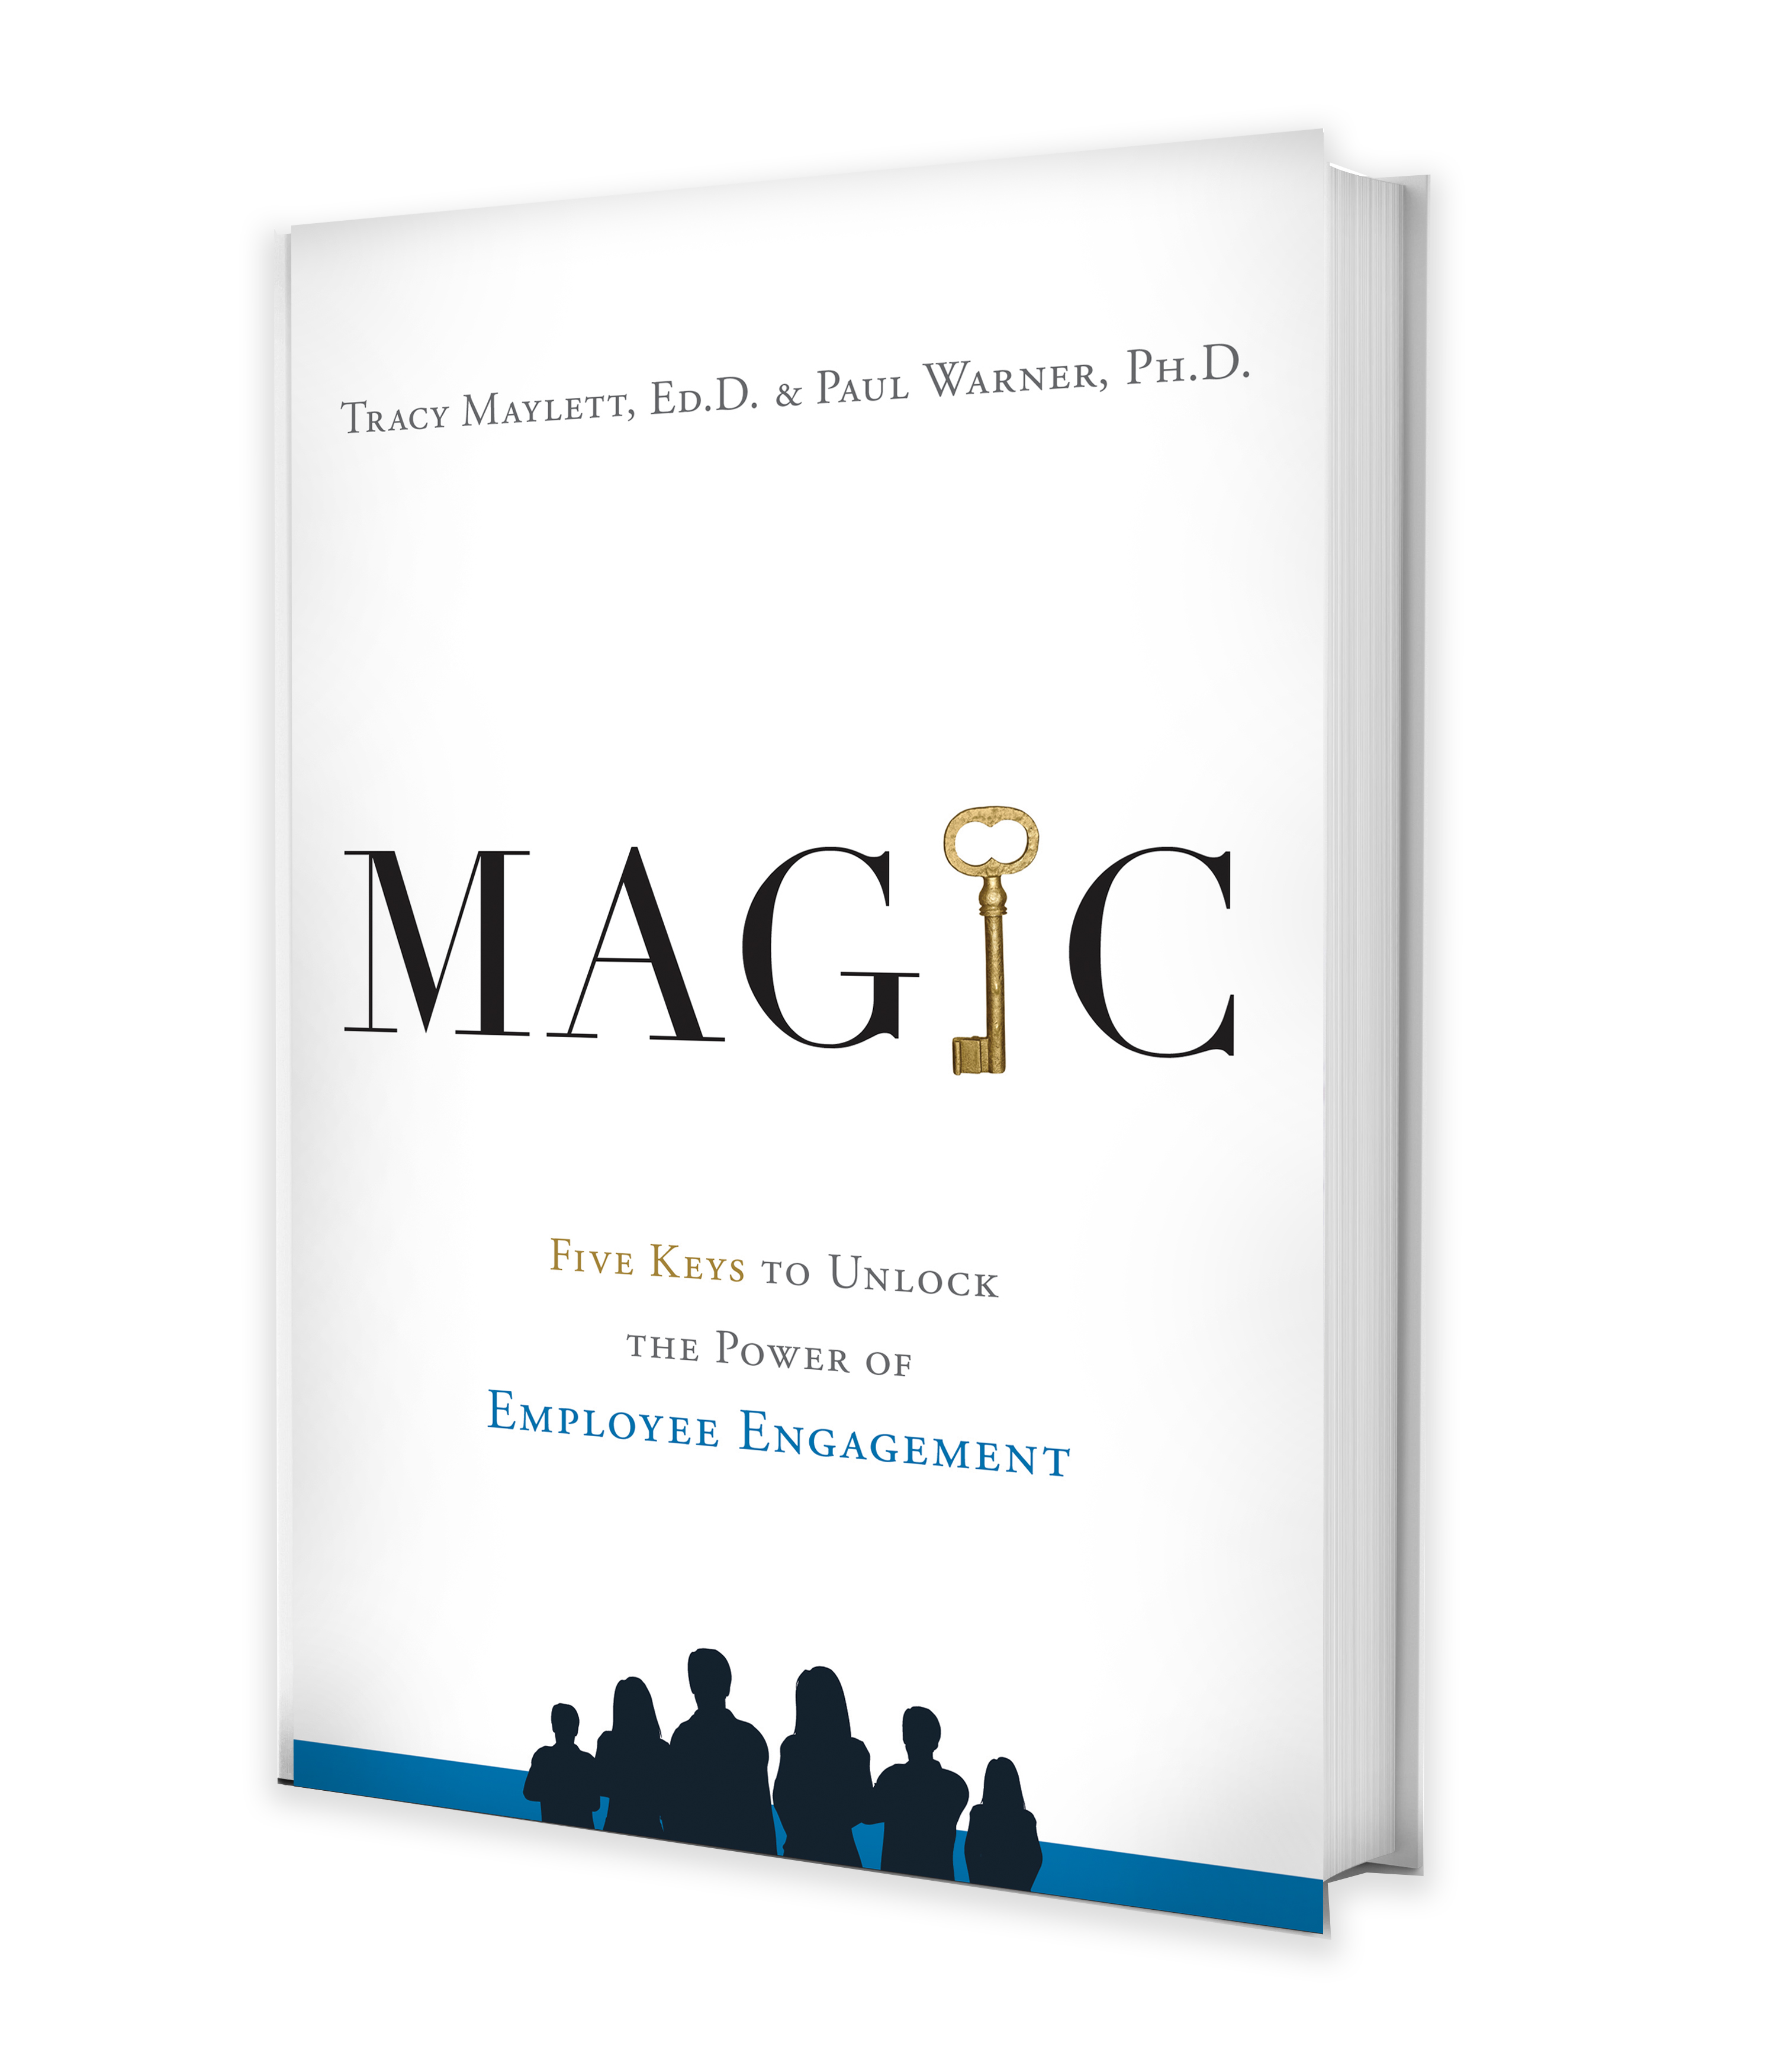 Book: MAGIC: 5 Keys to Unlock the Power of Employee Engagement